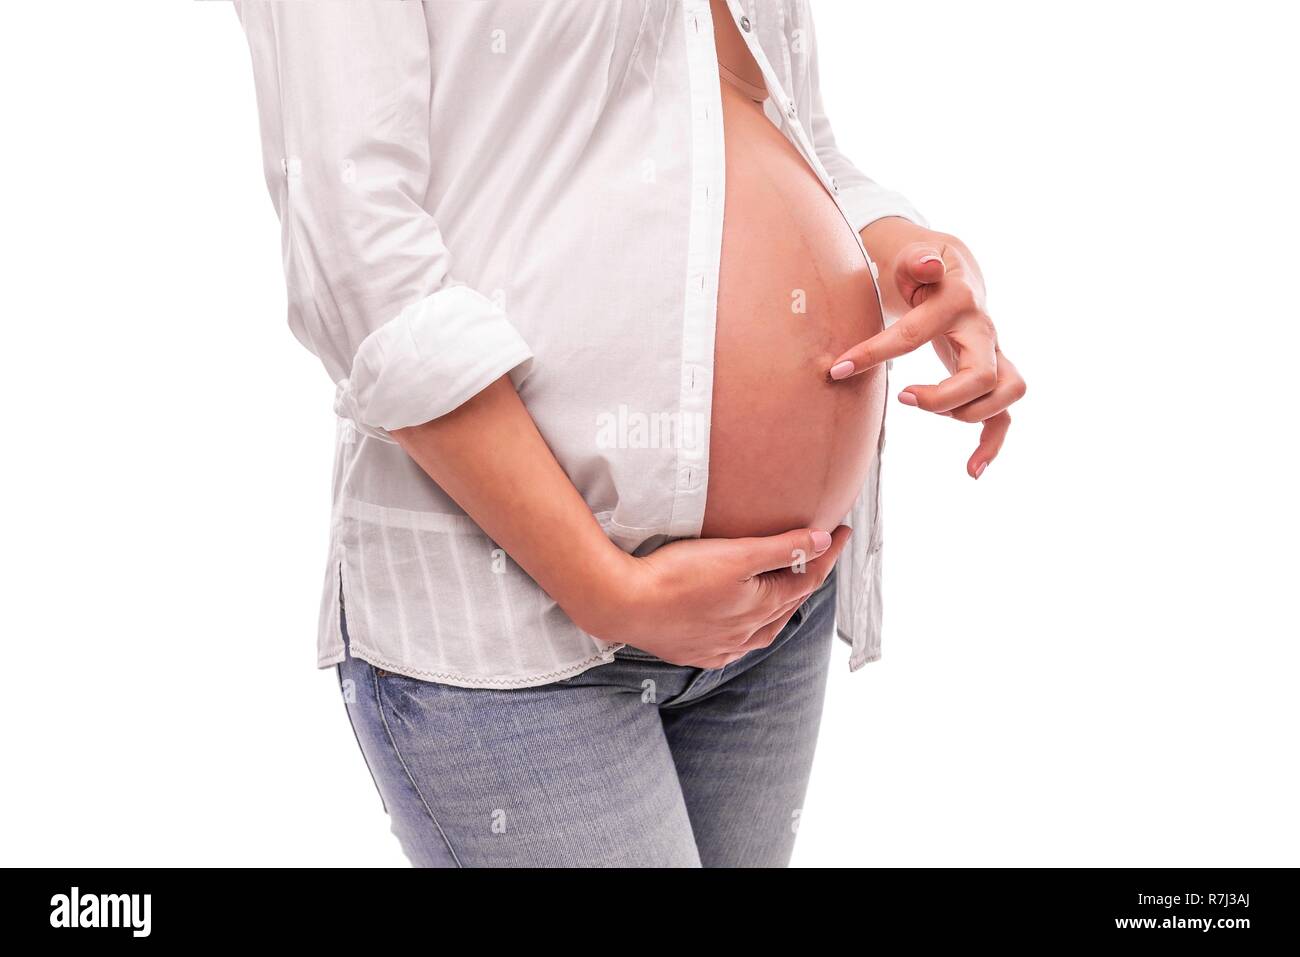 Pregnant woman touching her belly button with your finger. Stock Photo